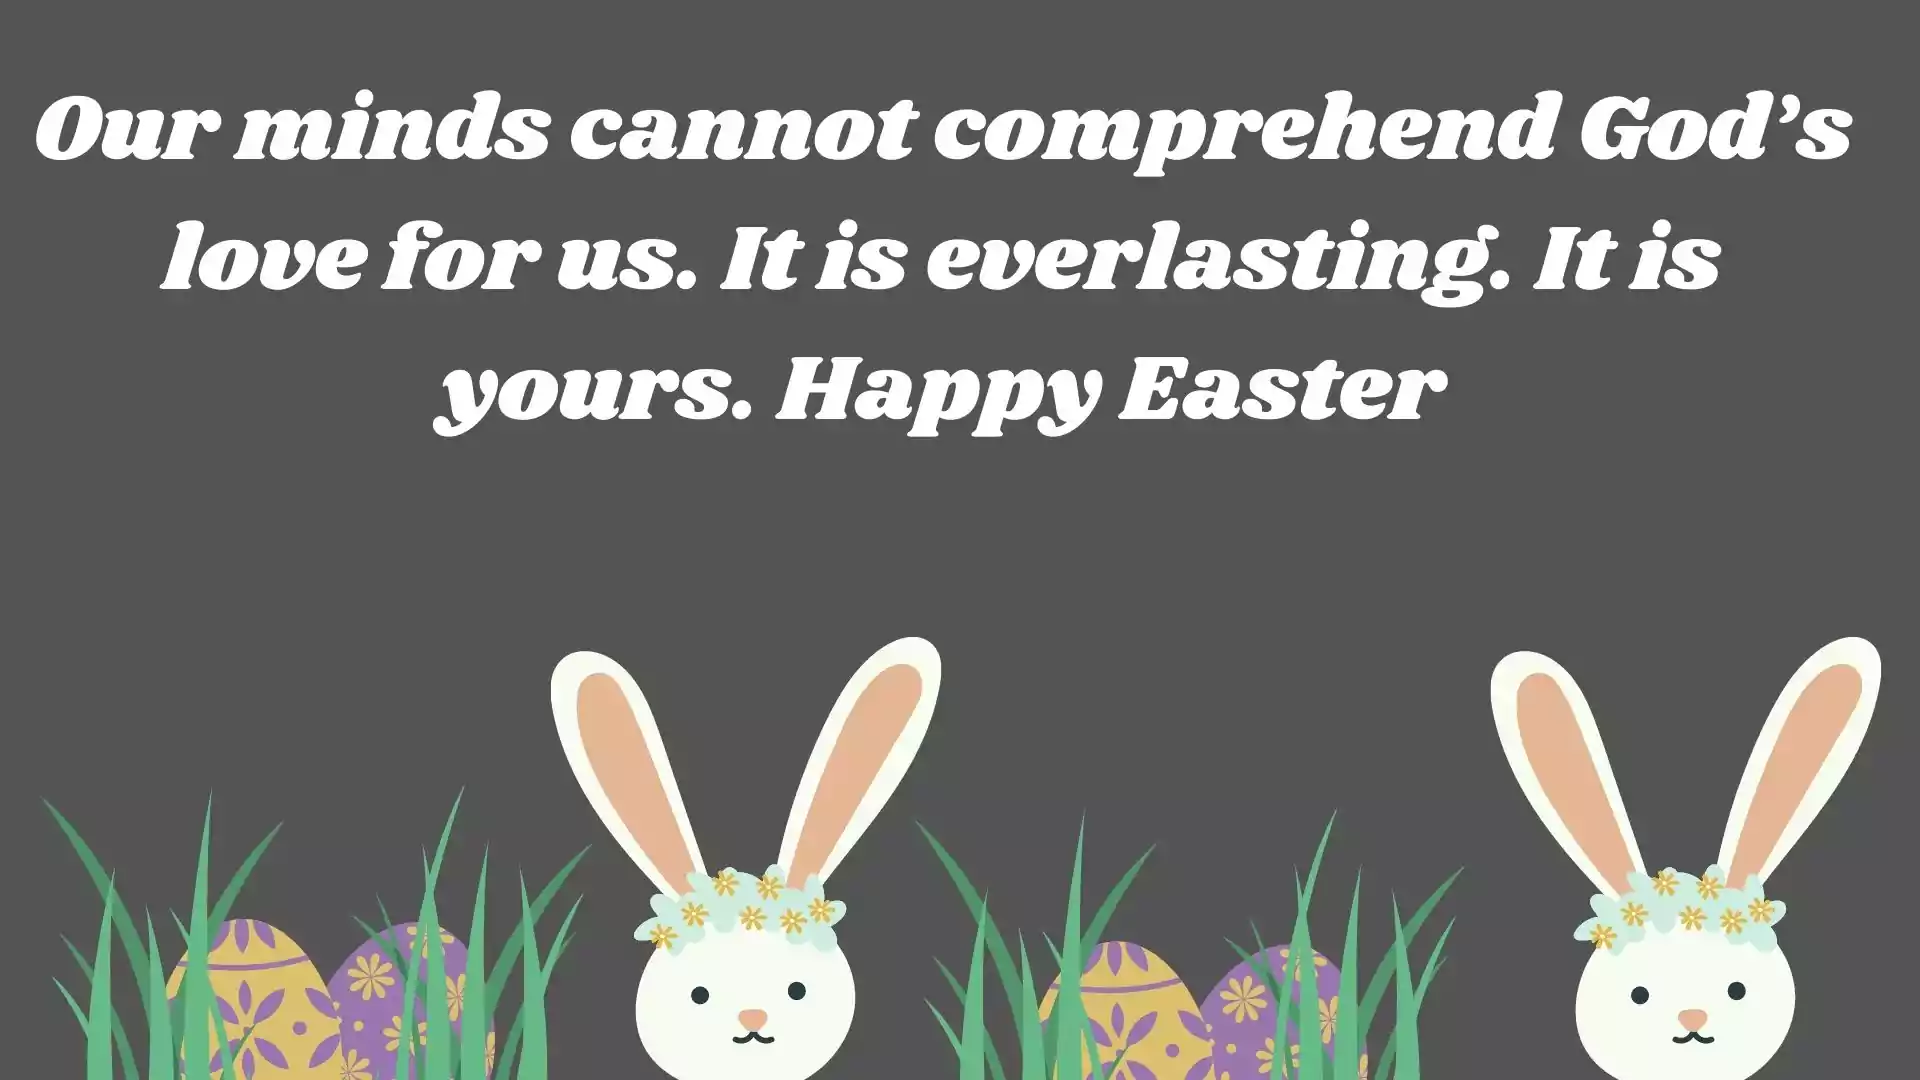 Which animal brings easter egg to children in Switzerland quote with image